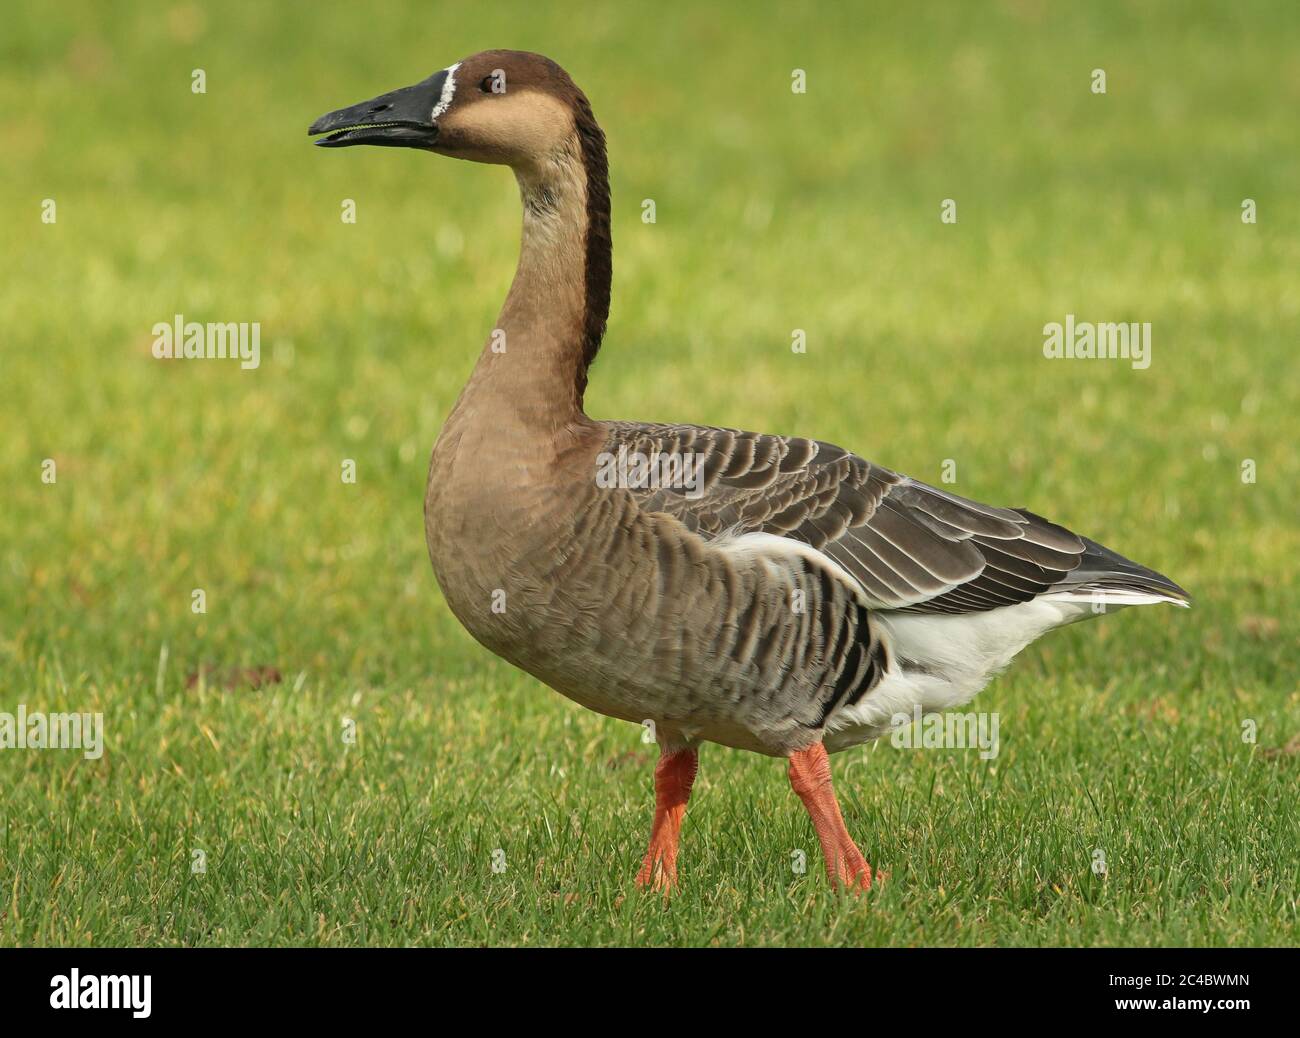 Swan Goose, Brown African Goose (Anser cygnoides), standing on a green lawn, side view, Netherlands Stock Photo